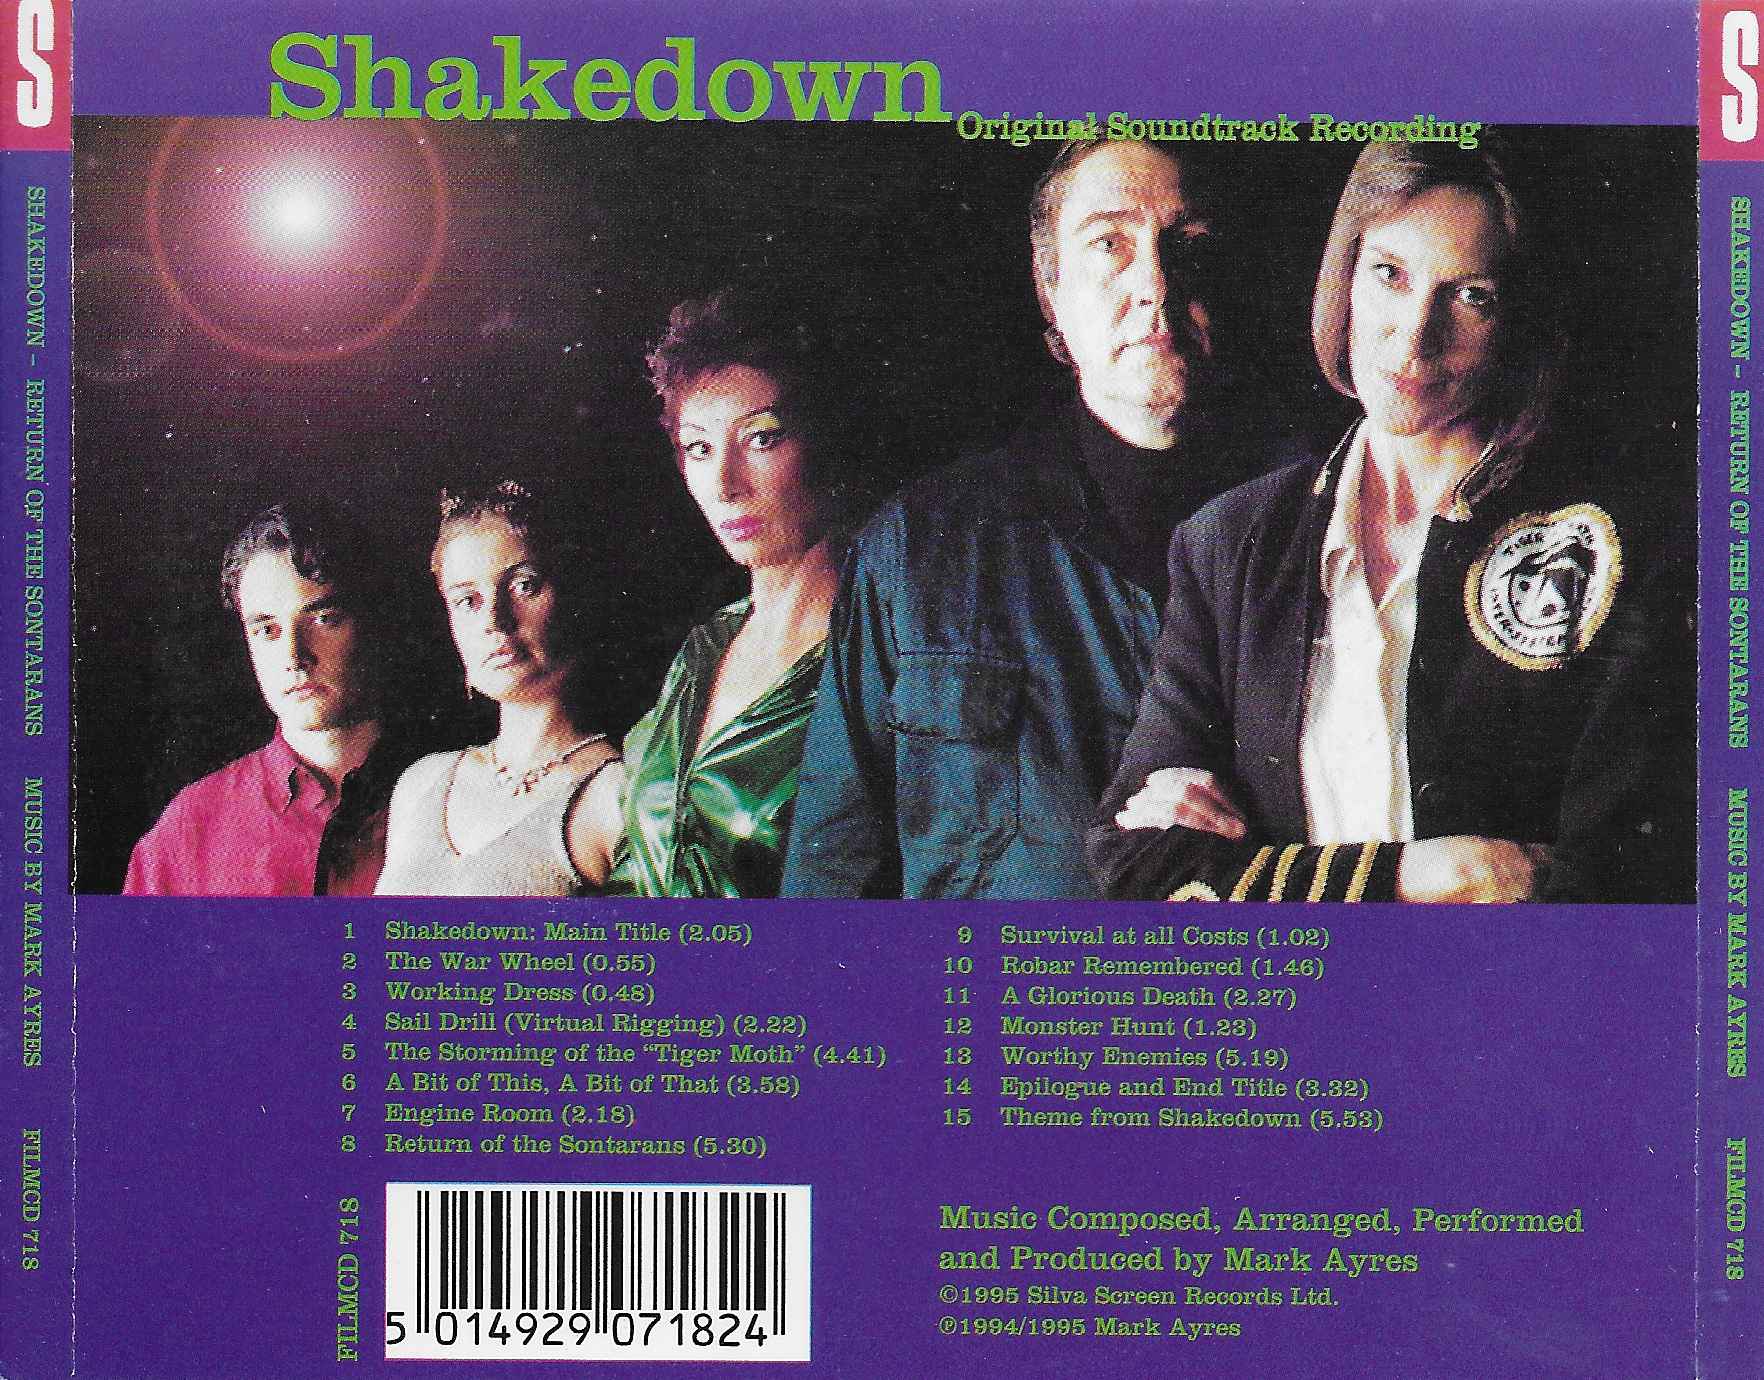 Picture of FILMCD 718 Shakedown by artist Mark Ayres from the BBC records and Tapes library